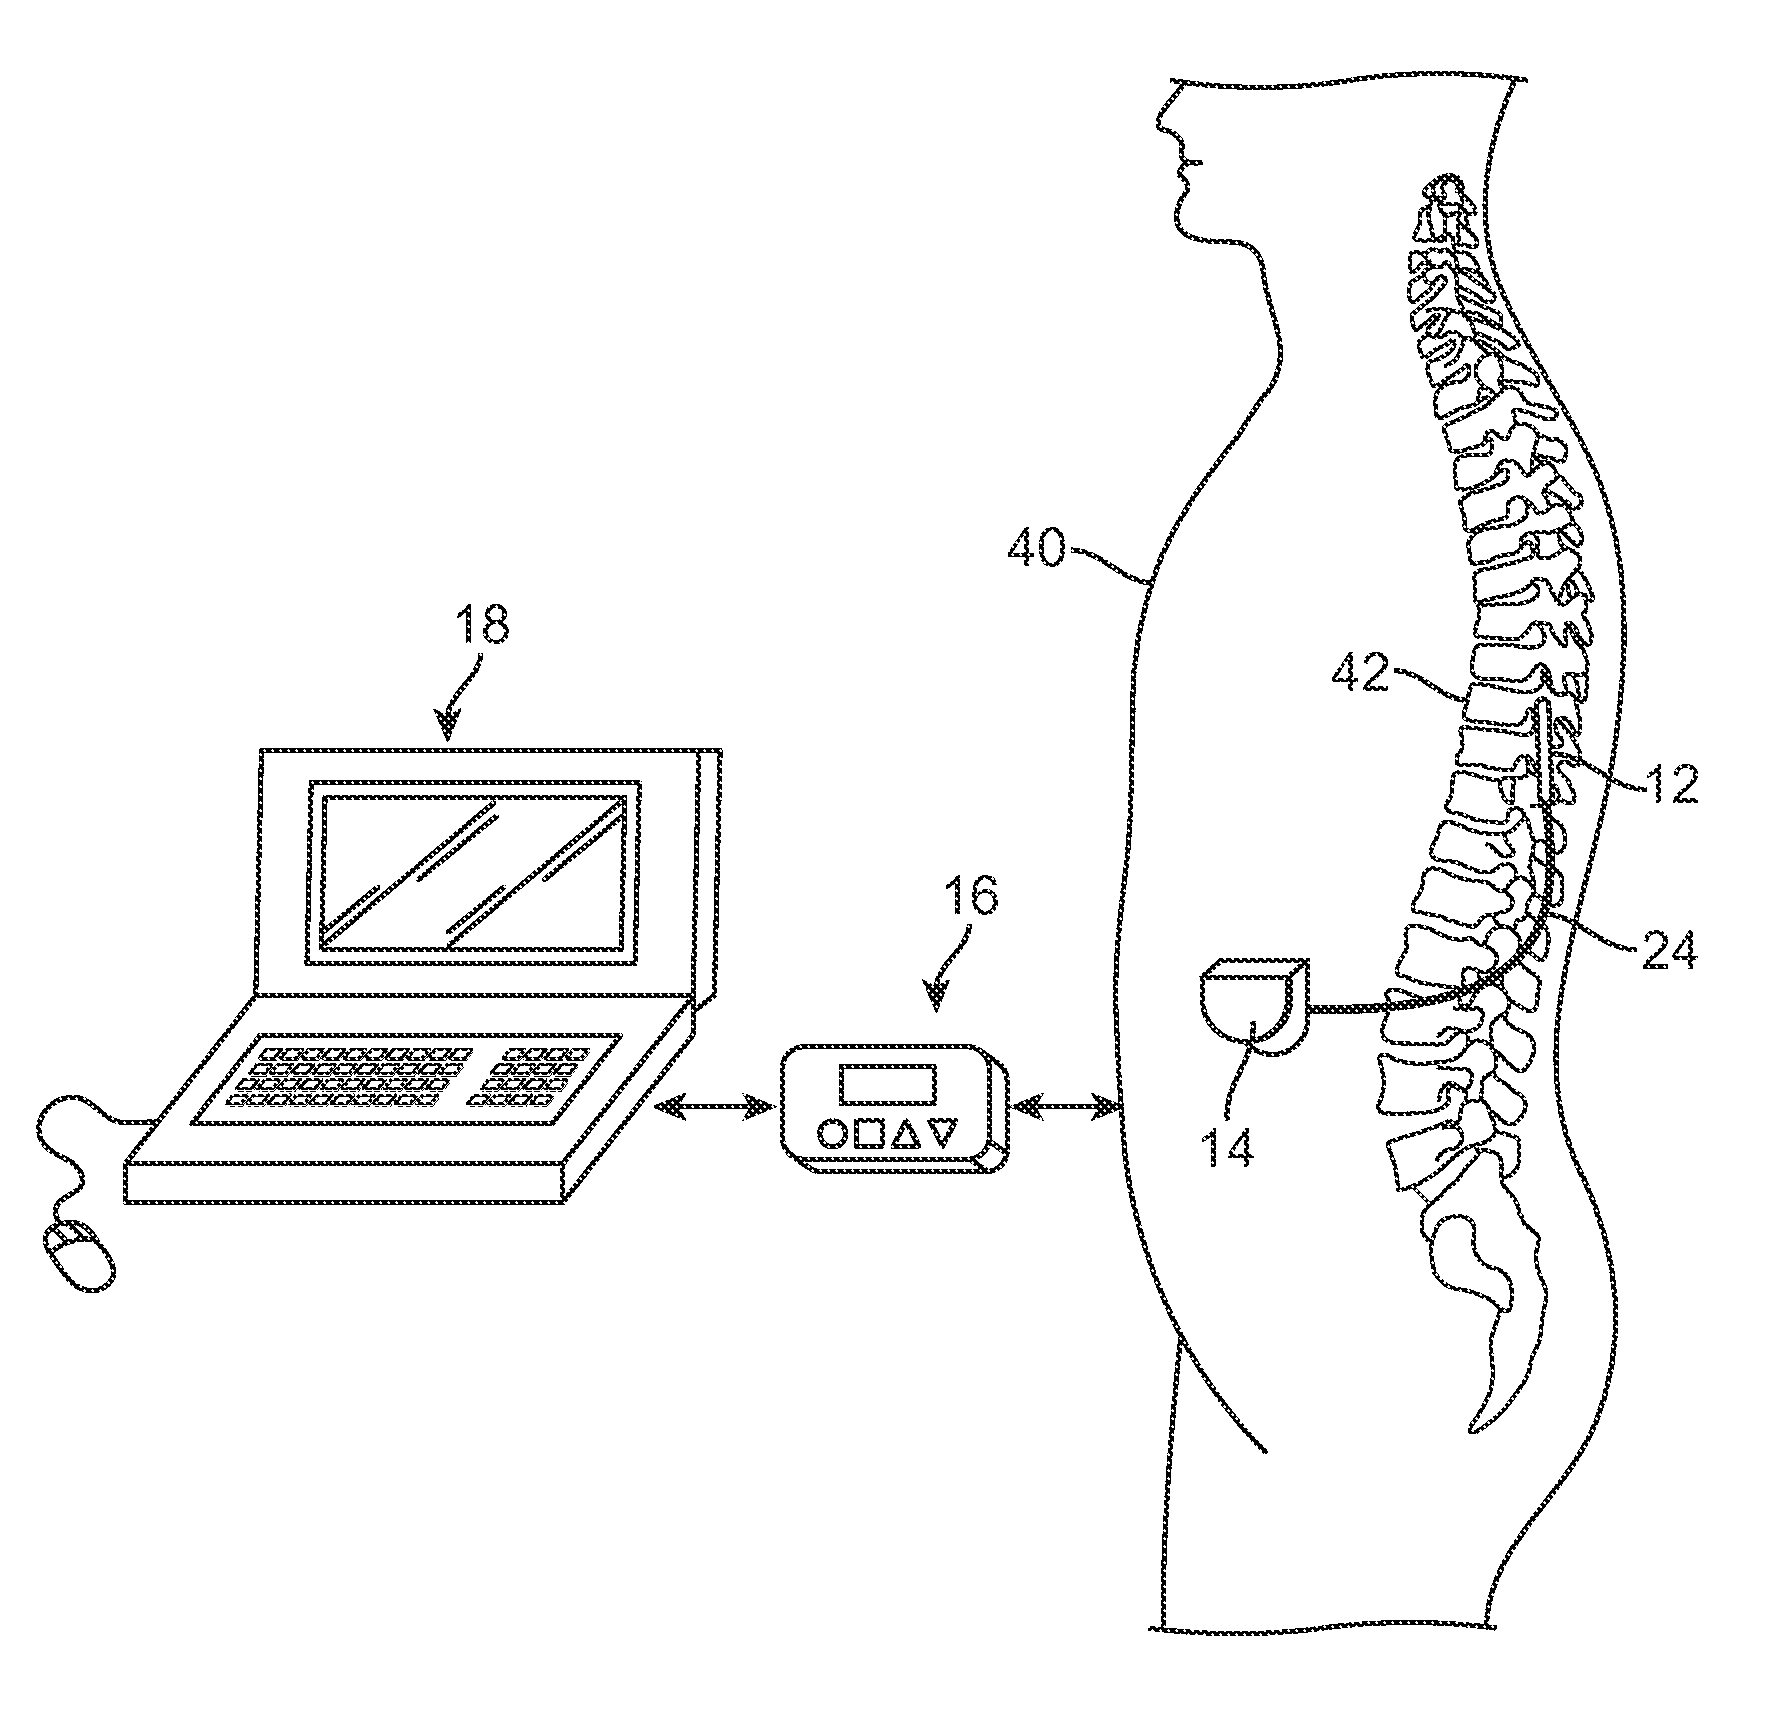 System and method for delivering modulated sub-threshold therapy to a patient